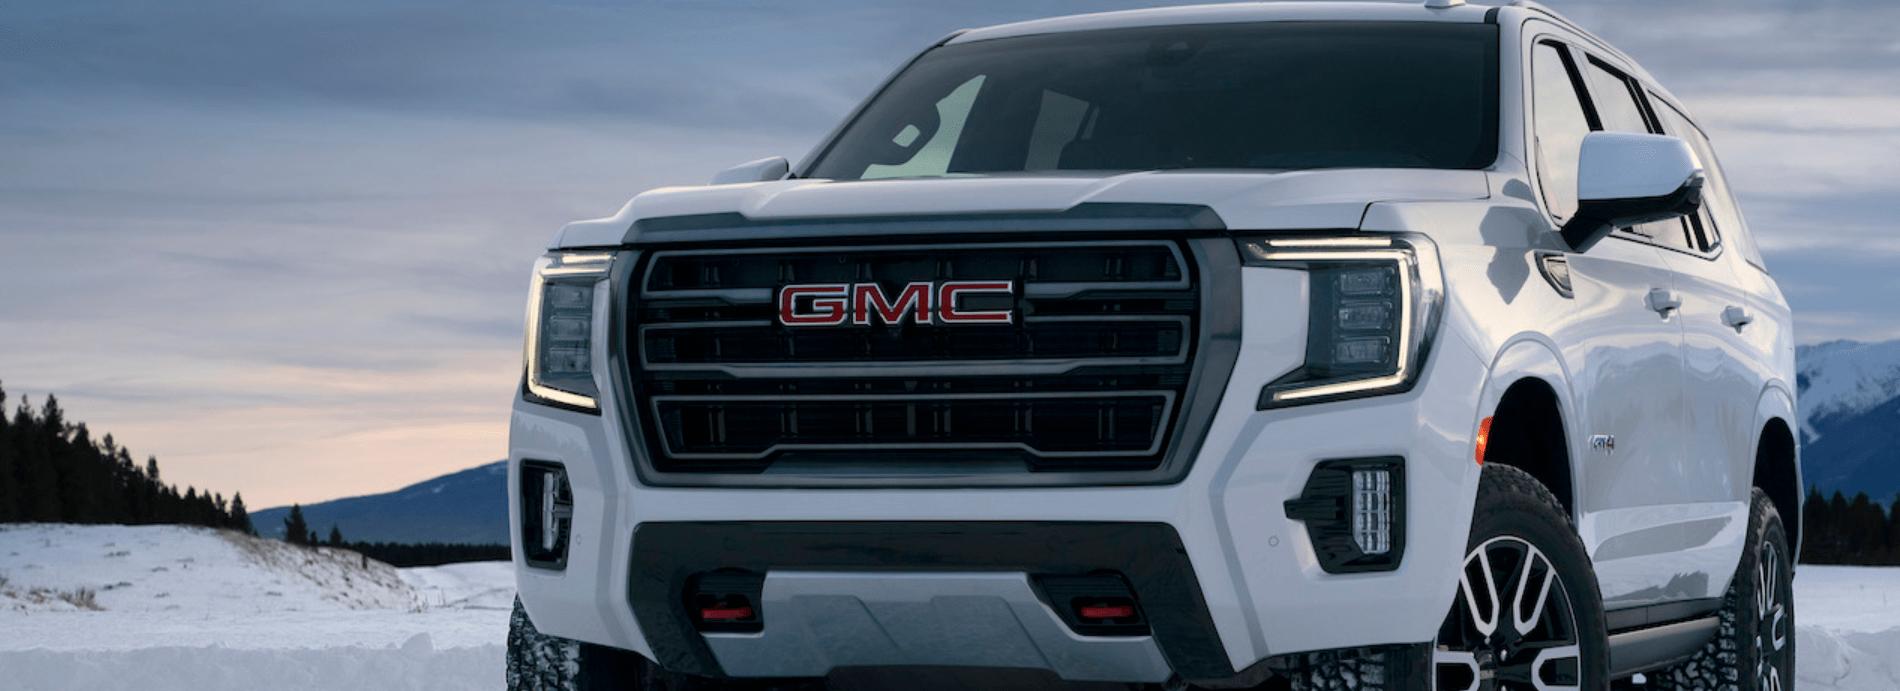 We'll give you a rundown of everything you need to know before you visit your local dealership. 2021 Gmc Yukon Specs Features And Review Lighthouse Buick Gmc